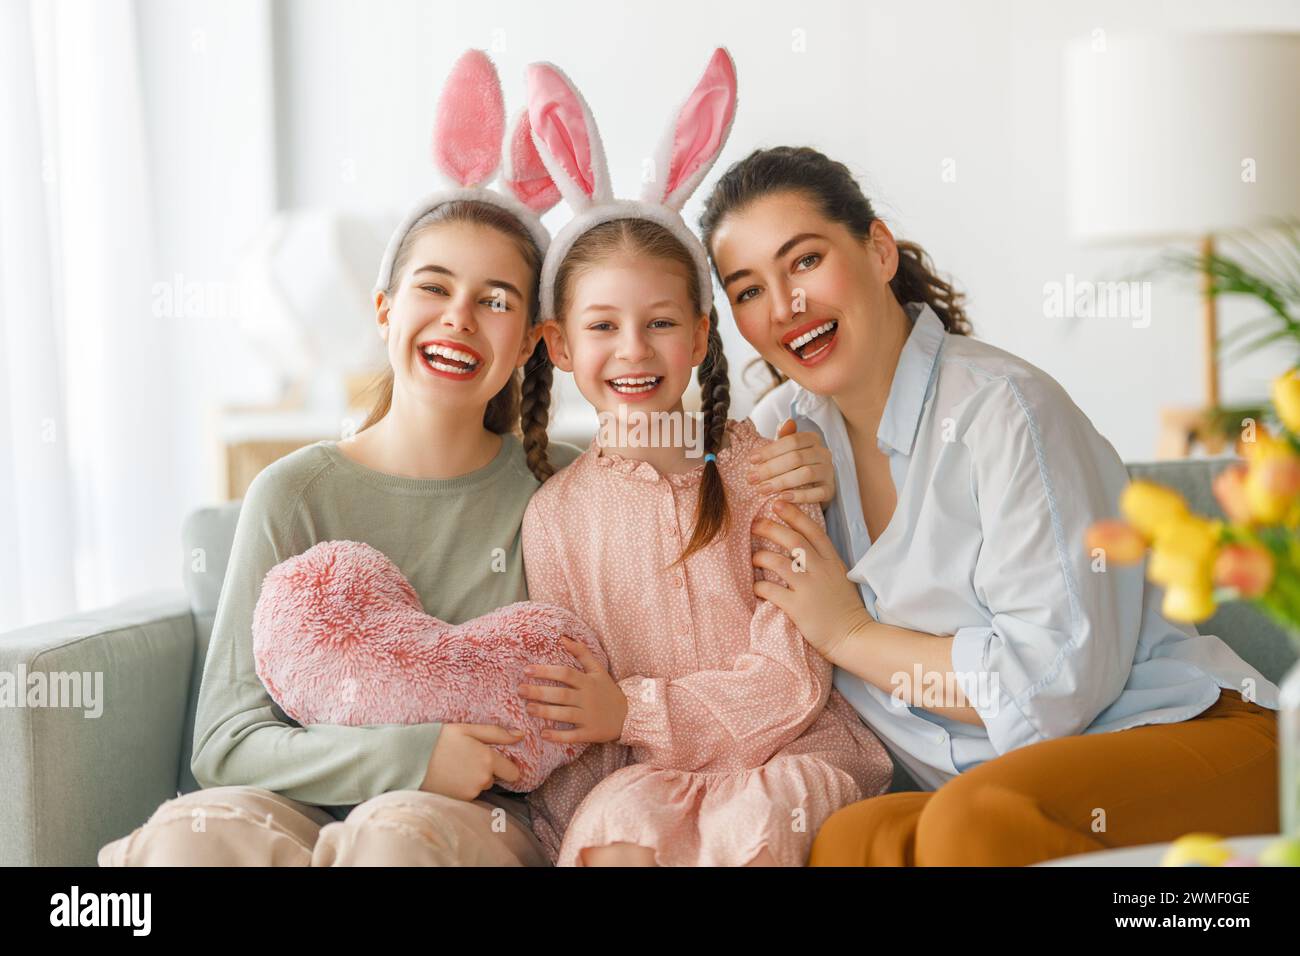 Happy holiday. Mother and her daughters. Family celebrating Easter. Cute little children girls are wearing bunny ears. Stock Photo